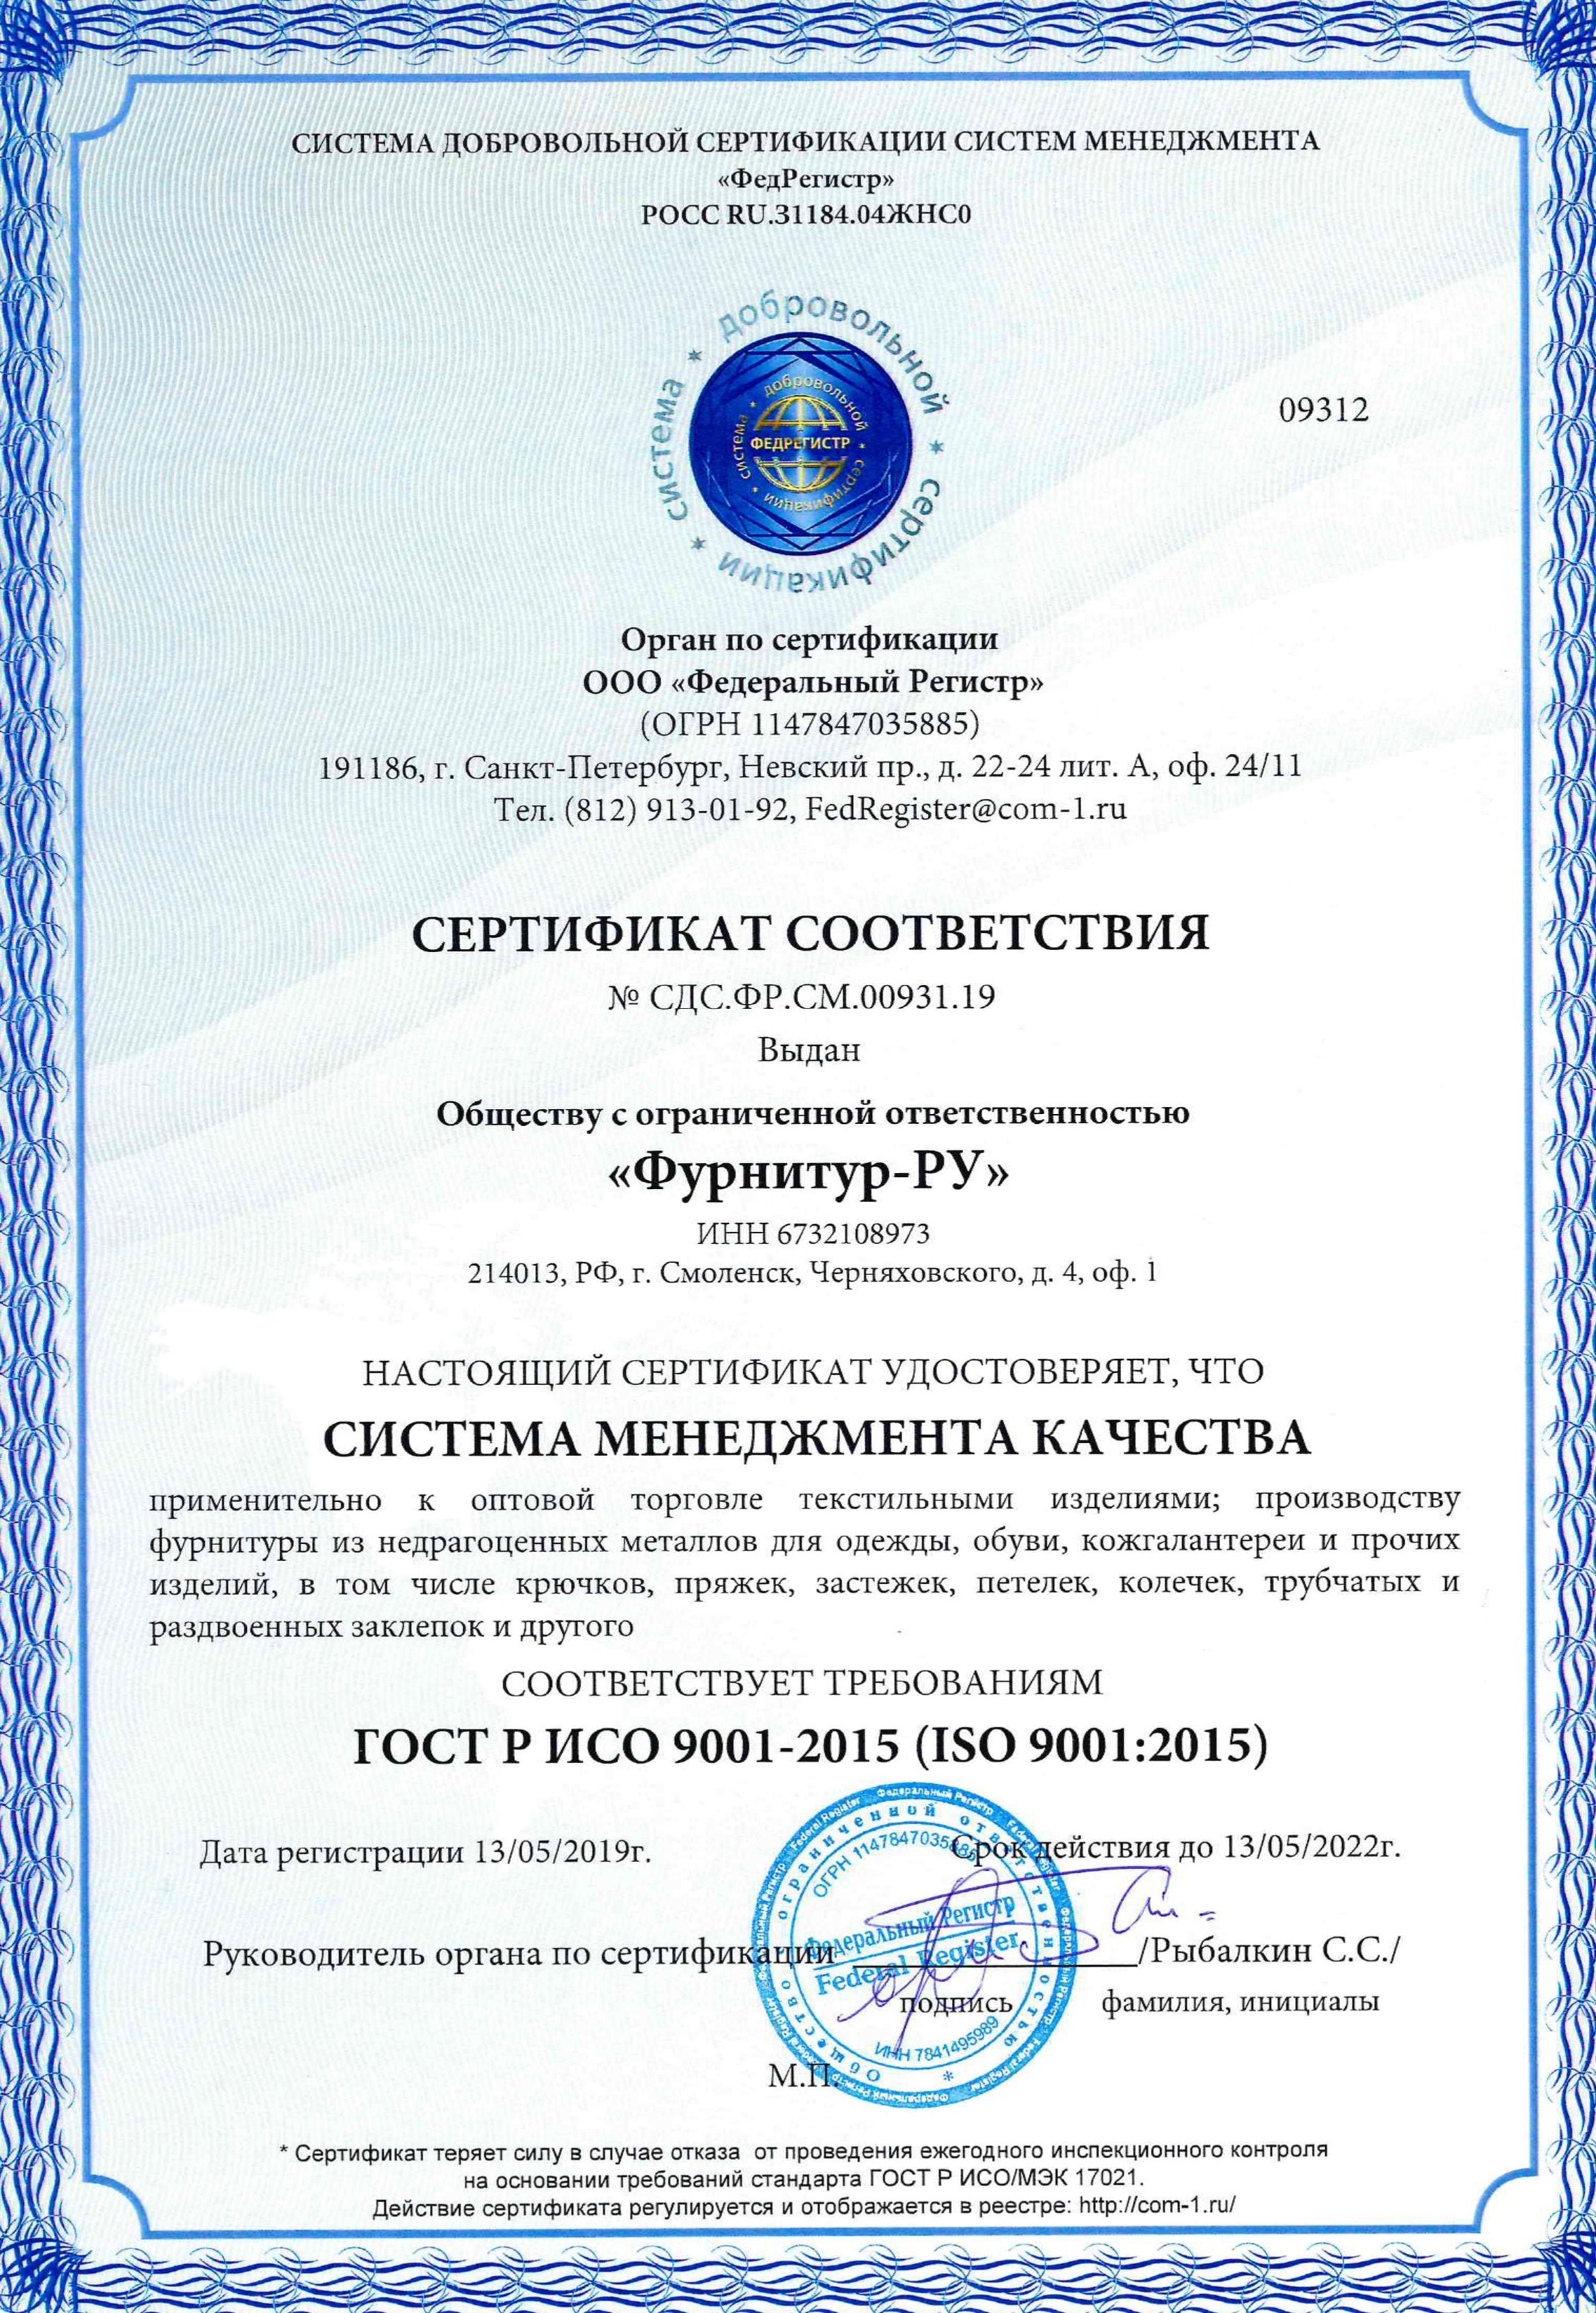 Certificate of compliance of GOST ISO 9001:2015